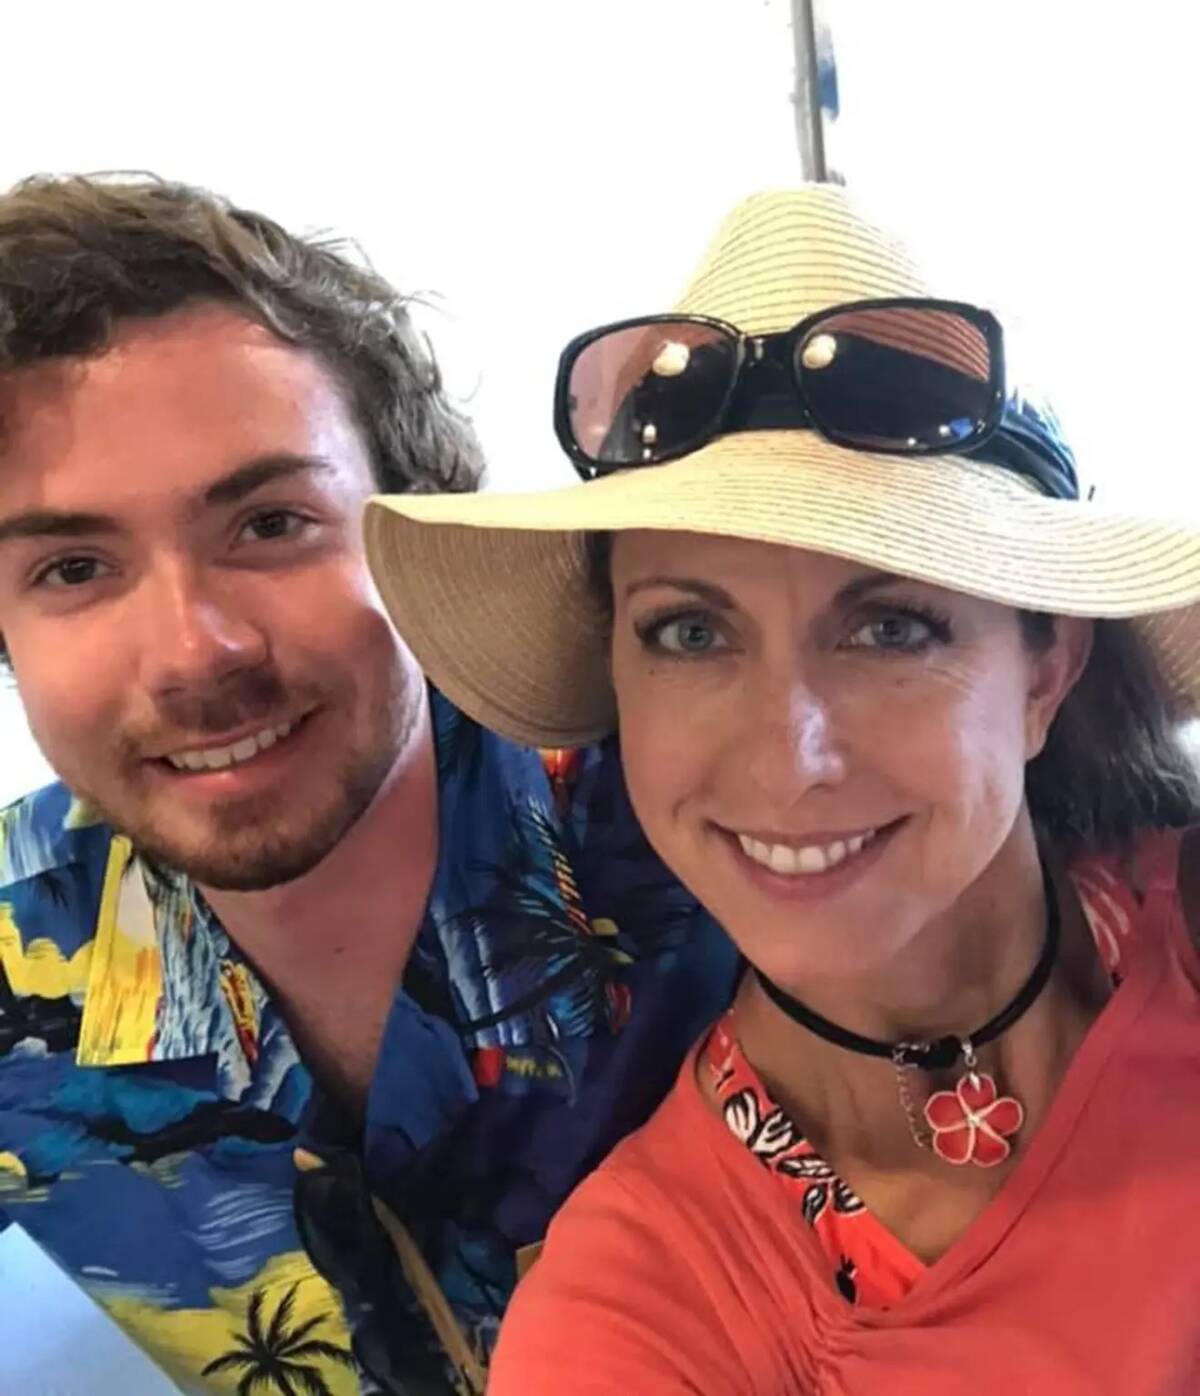 Mary Ann taking a selfie with her son, Tyler, both in summertime clothes.